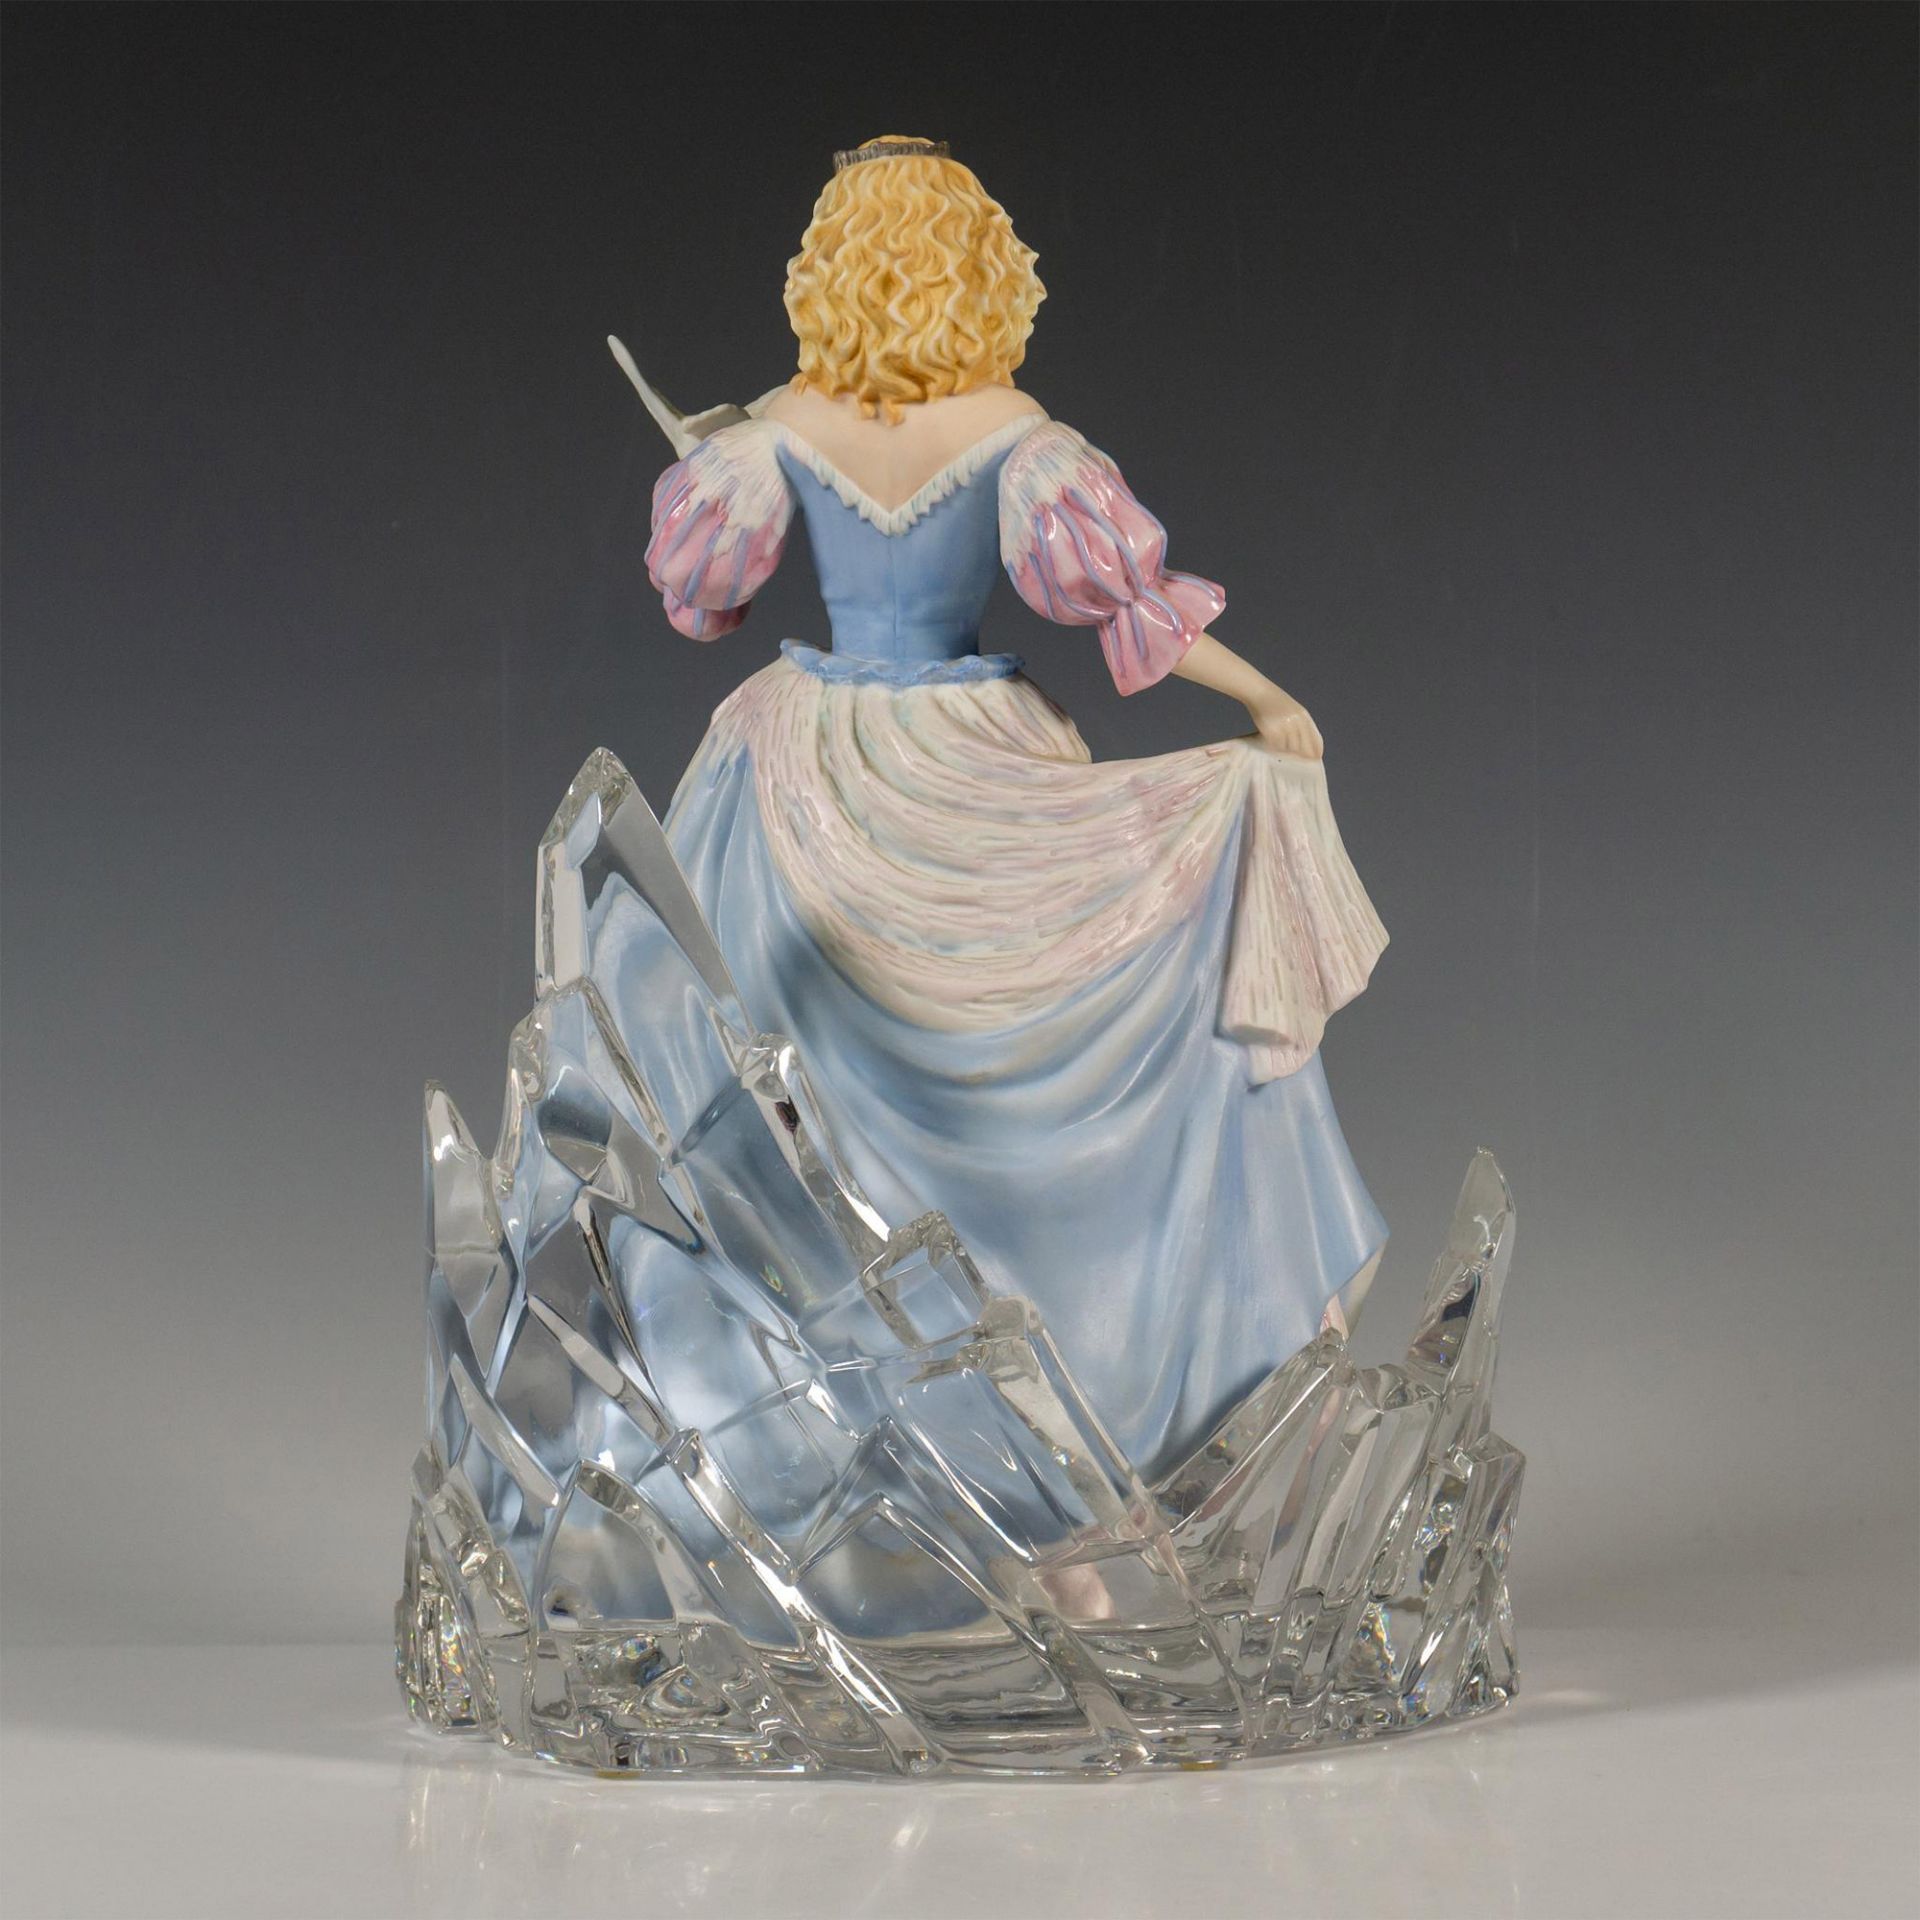 2pc House of Faberge Figurine, Princess Of The Ice Palace - Image 5 of 6